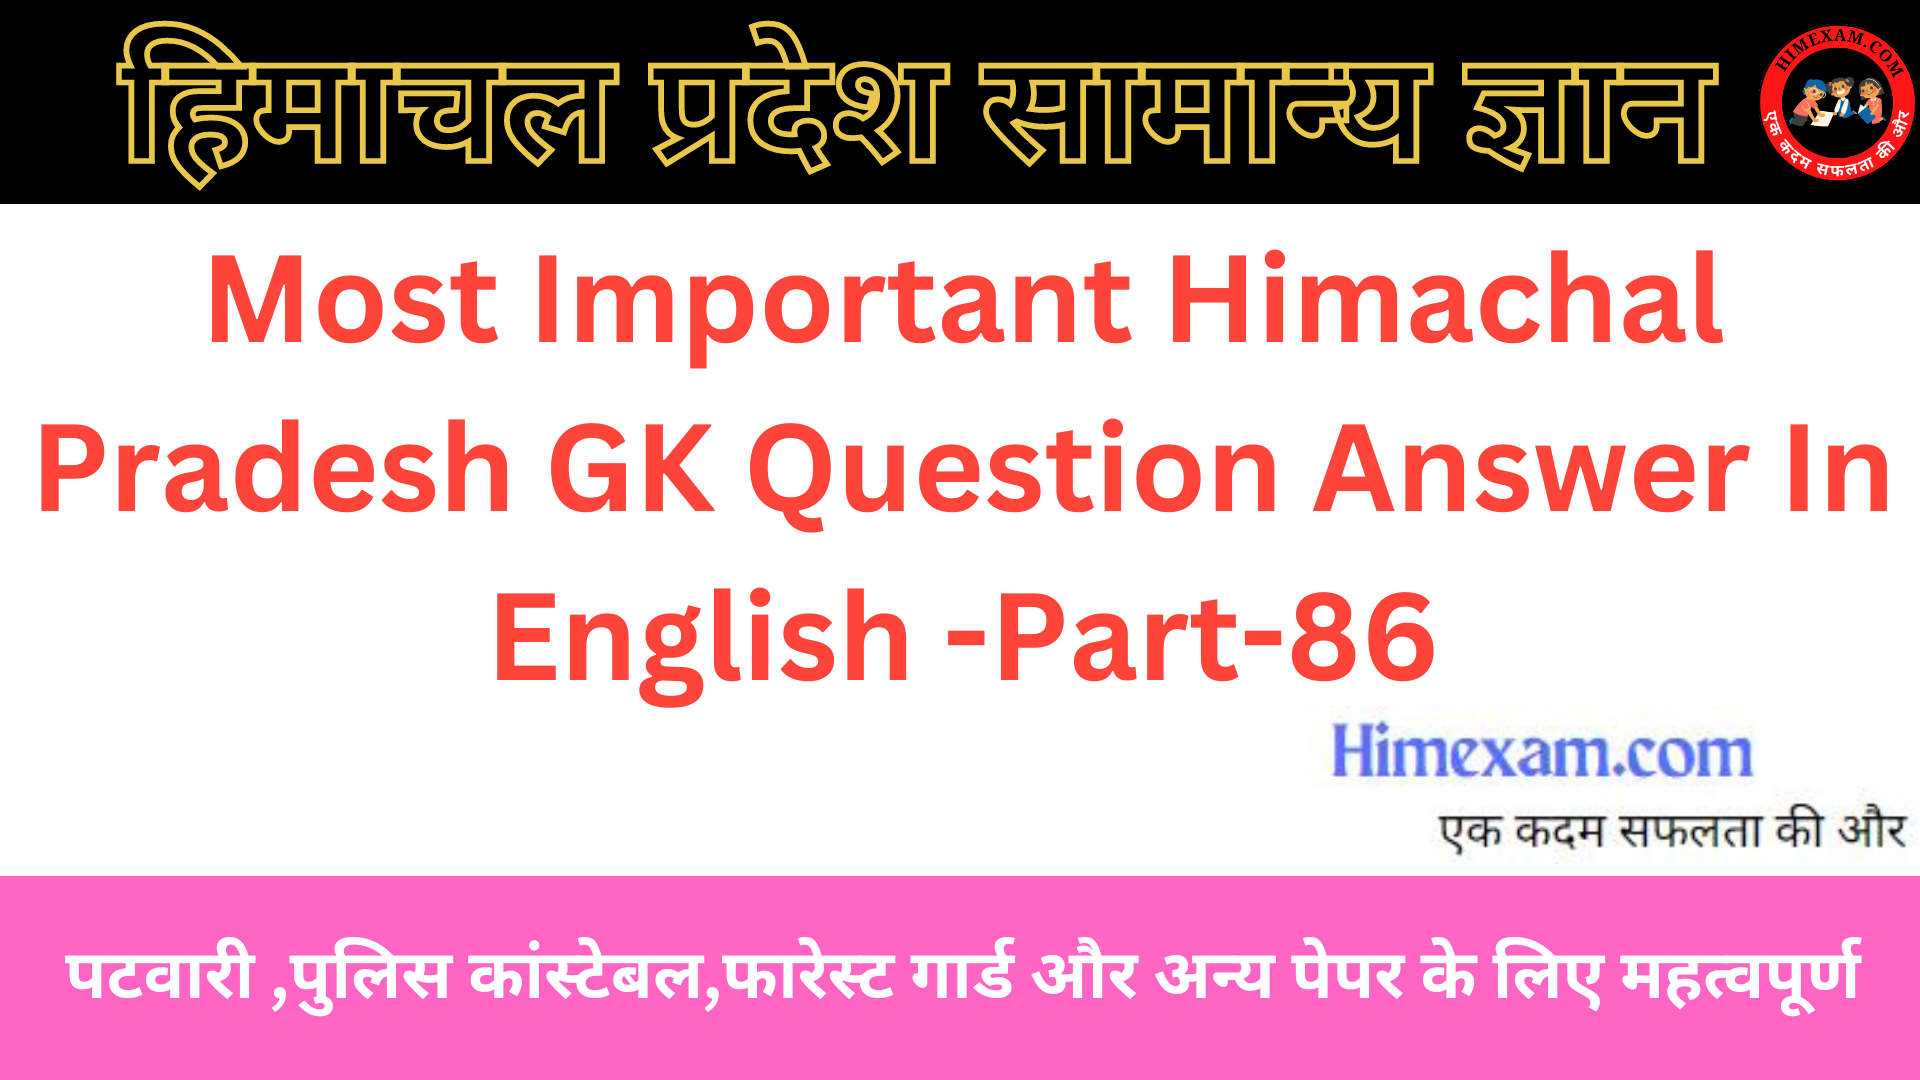 Most Important Himachal Pradesh GK Question Answer In English -Part-86